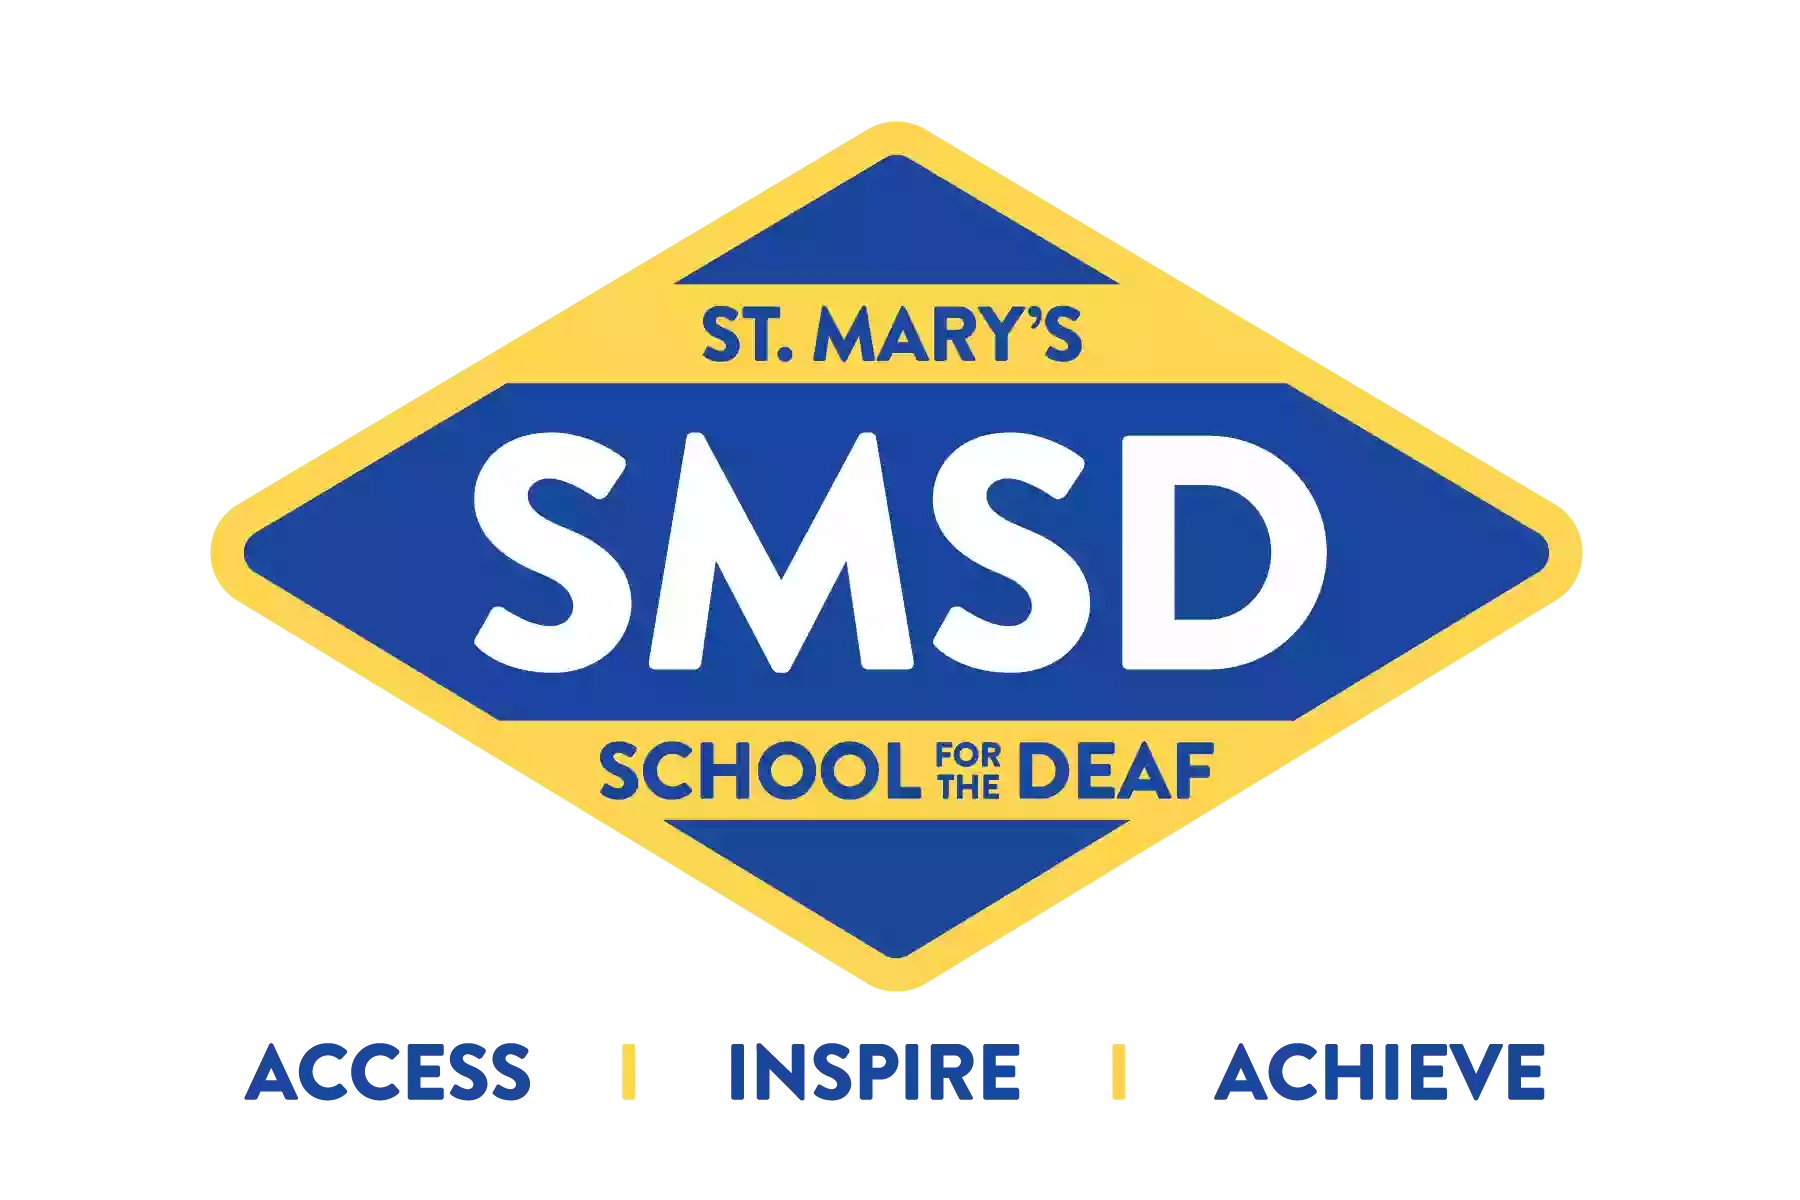 St. Mary's School for the Deaf